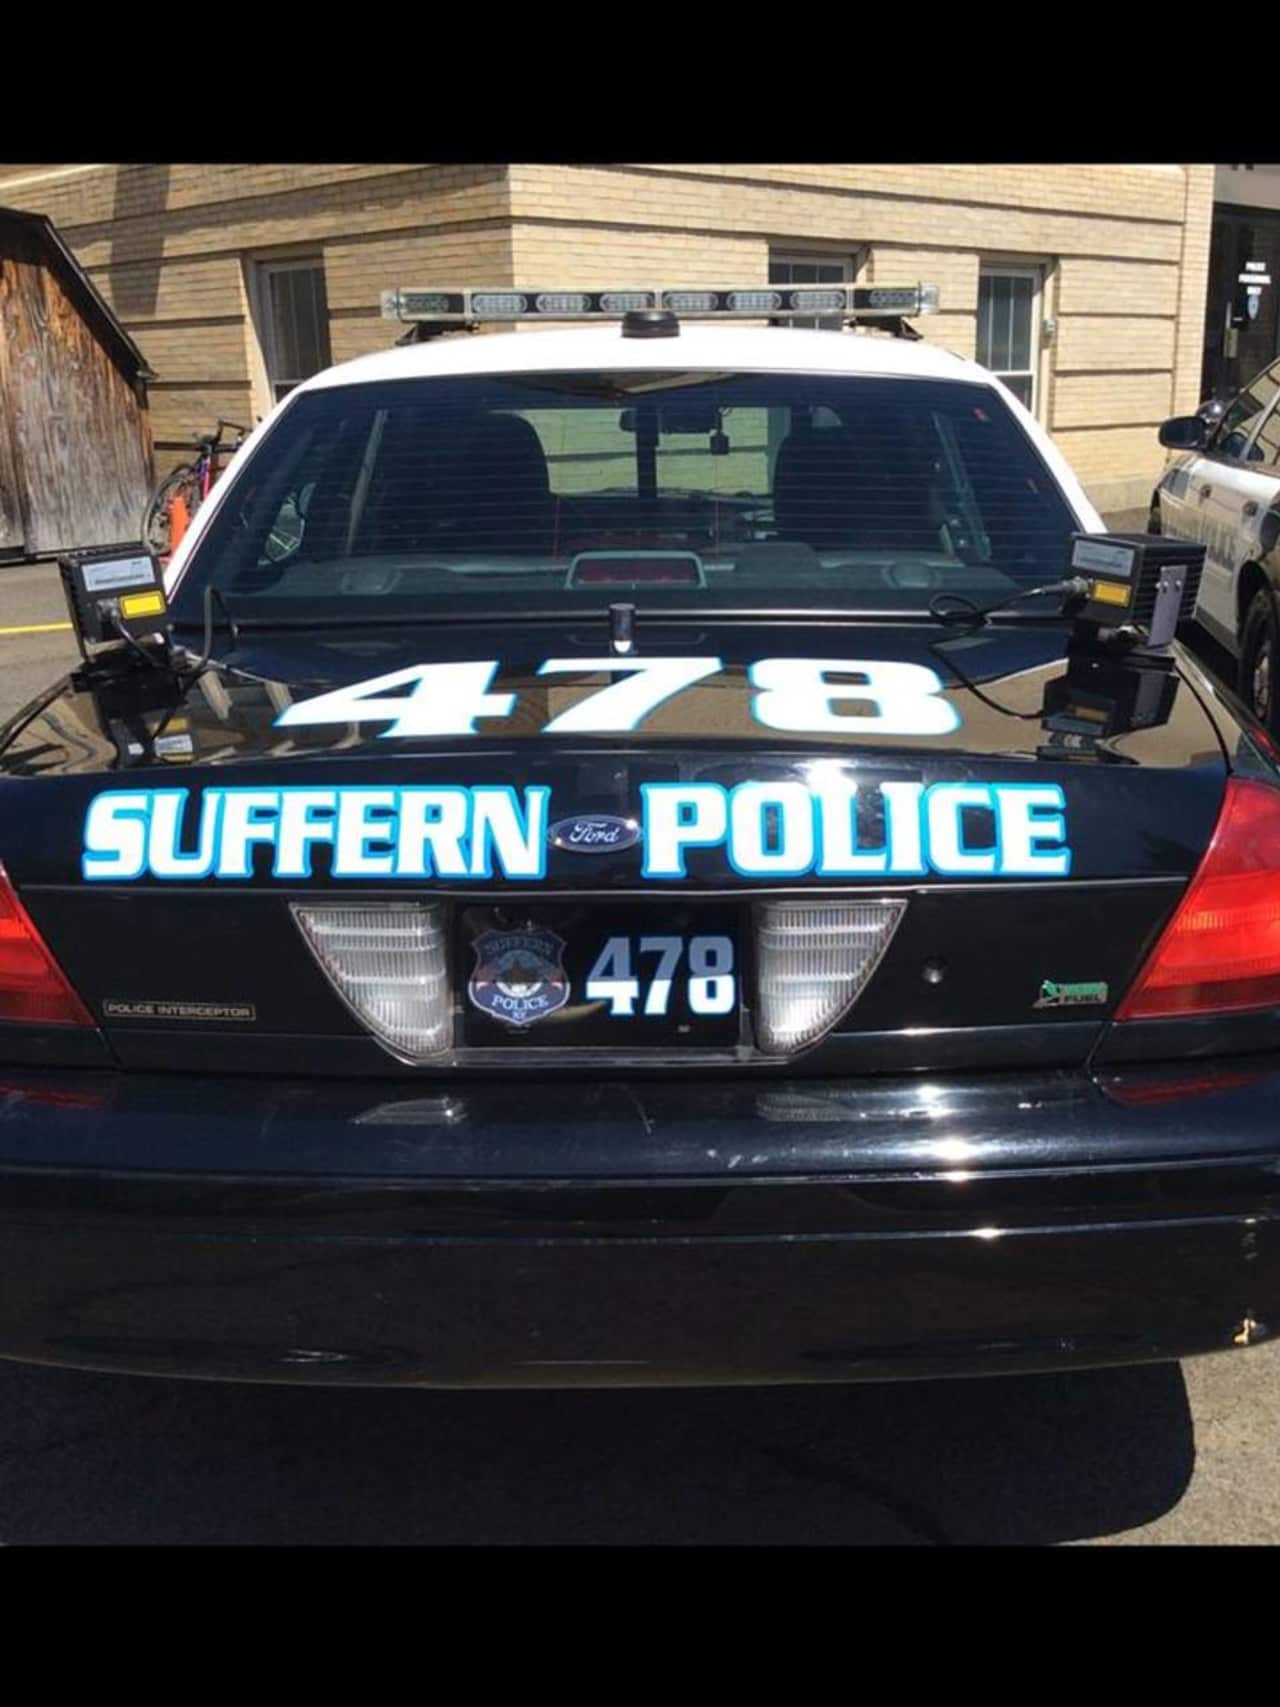 The Suffern Police Department is asking residents to nominate volunteers for recognition on the department's Facebook page.